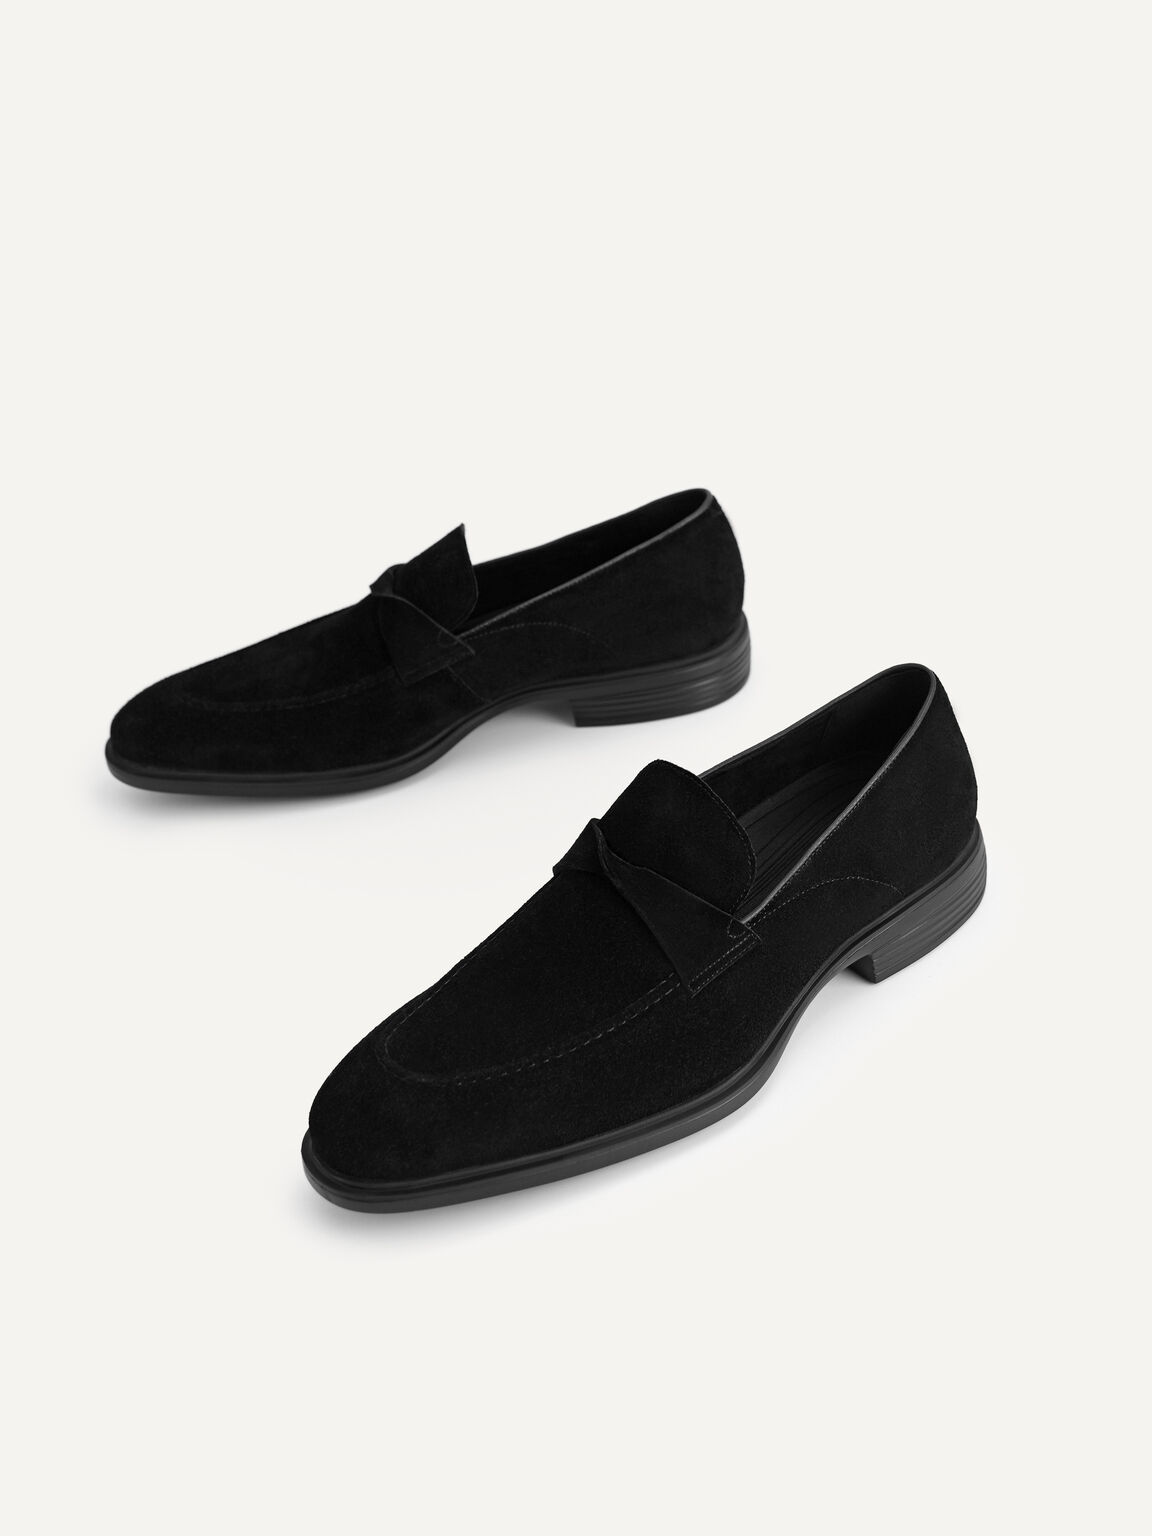 Altitude Leather Loafers, Black